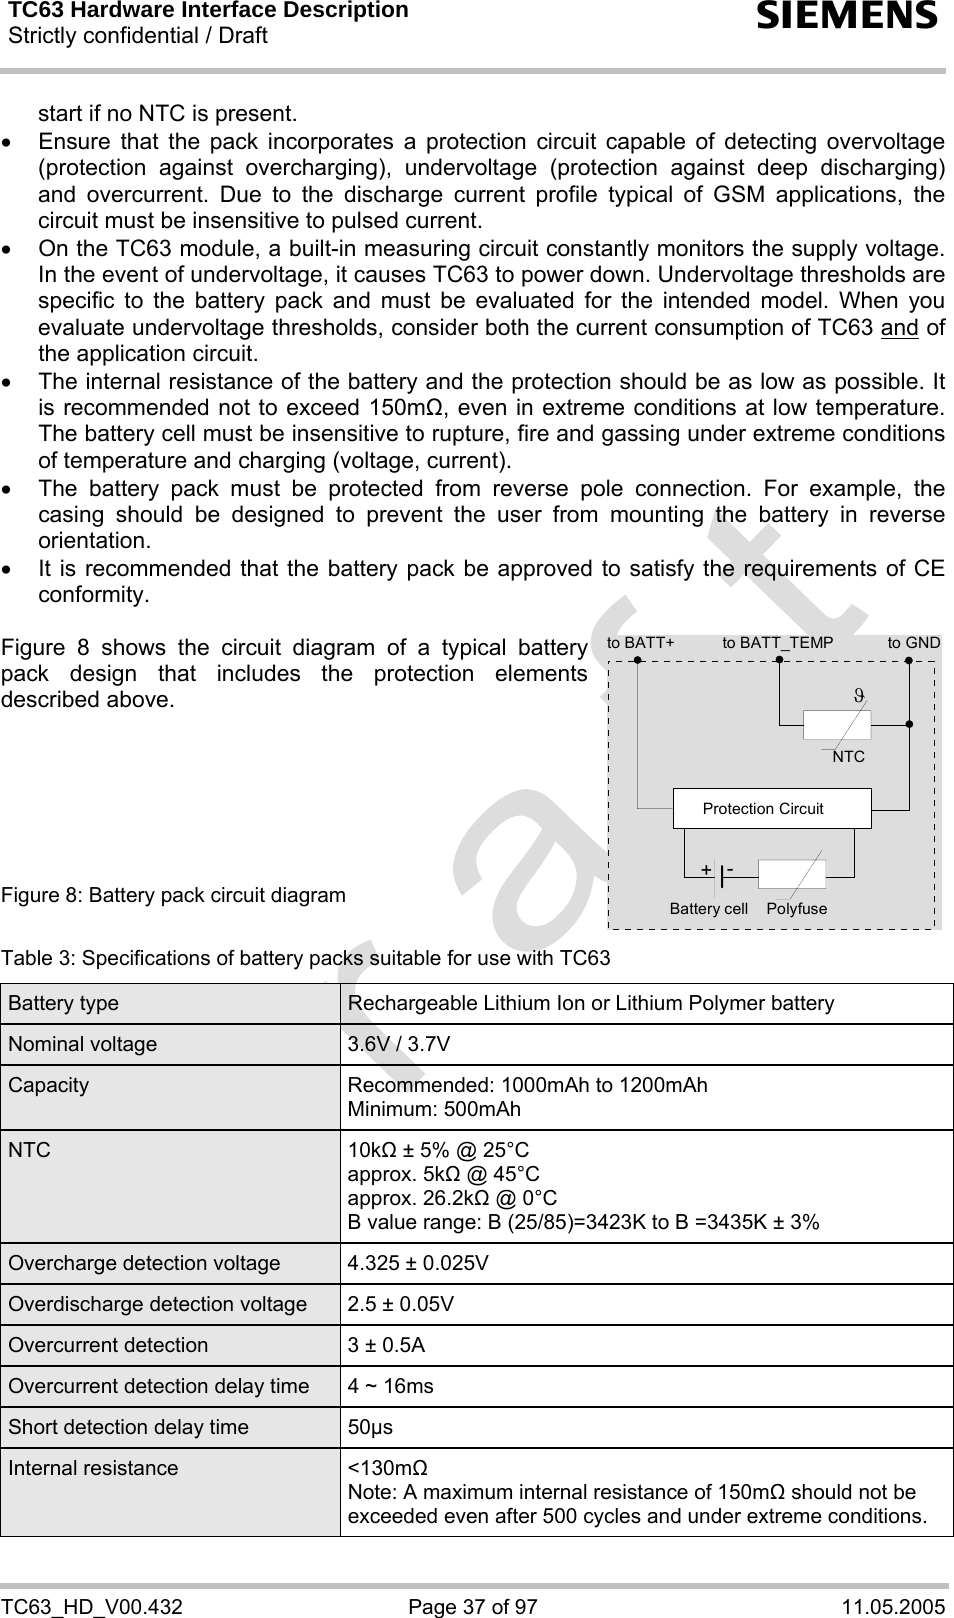 TC63 Hardware Interface Description Strictly confidential / Draft  s TC63_HD_V00.432  Page 37 of 97  11.05.2005 start if no NTC is present. •  Ensure that the pack incorporates a protection circuit capable of detecting overvoltage (protection against overcharging), undervoltage (protection against deep discharging) and overcurrent. Due to the discharge current profile typical of GSM applications, the circuit must be insensitive to pulsed current. •  On the TC63 module, a built-in measuring circuit constantly monitors the supply voltage. In the event of undervoltage, it causes TC63 to power down. Undervoltage thresholds are specific to the battery pack and must be evaluated for the intended model. When you evaluate undervoltage thresholds, consider both the current consumption of TC63 and of the application circuit.  •  The internal resistance of the battery and the protection should be as low as possible. It is recommended not to exceed 150m, even in extreme conditions at low temperature. The battery cell must be insensitive to rupture, fire and gassing under extreme conditions of temperature and charging (voltage, current). •  The battery pack must be protected from reverse pole connection. For example, the casing should be designed to prevent the user from mounting the battery in reverse orientation. •  It is recommended that the battery pack be approved to satisfy the requirements of CE conformity.  Figure 8 shows the circuit diagram of a typical battery pack design that includes the protection elements described above.        Figure 8: Battery pack circuit diagram  Table 3: Specifications of battery packs suitable for use with TC63 Battery type  Rechargeable Lithium Ion or Lithium Polymer battery Nominal voltage  3.6V / 3.7V Capacity  Recommended: 1000mAh to 1200mAh Minimum: 500mAh NTC 10k ± 5% @ 25°C approx. 5k @ 45°C approx. 26.2k @ 0°C B value range: B (25/85)=3423K to B =3435K ± 3% Overcharge detection voltage  4.325 ± 0.025V Overdischarge detection voltage  2.5 ± 0.05V Overcurrent detection  3 ± 0.5A Overcurrent detection delay time  4 ~ 16ms Short detection delay time  50µs Internal resistance  &lt;130m Note: A maximum internal resistance of 150m should not be exceeded even after 500 cycles and under extreme conditions. to BATT_TEMP to GNDNTCPolyfuseϑProtection Circuit+-Battery cellto BATT+